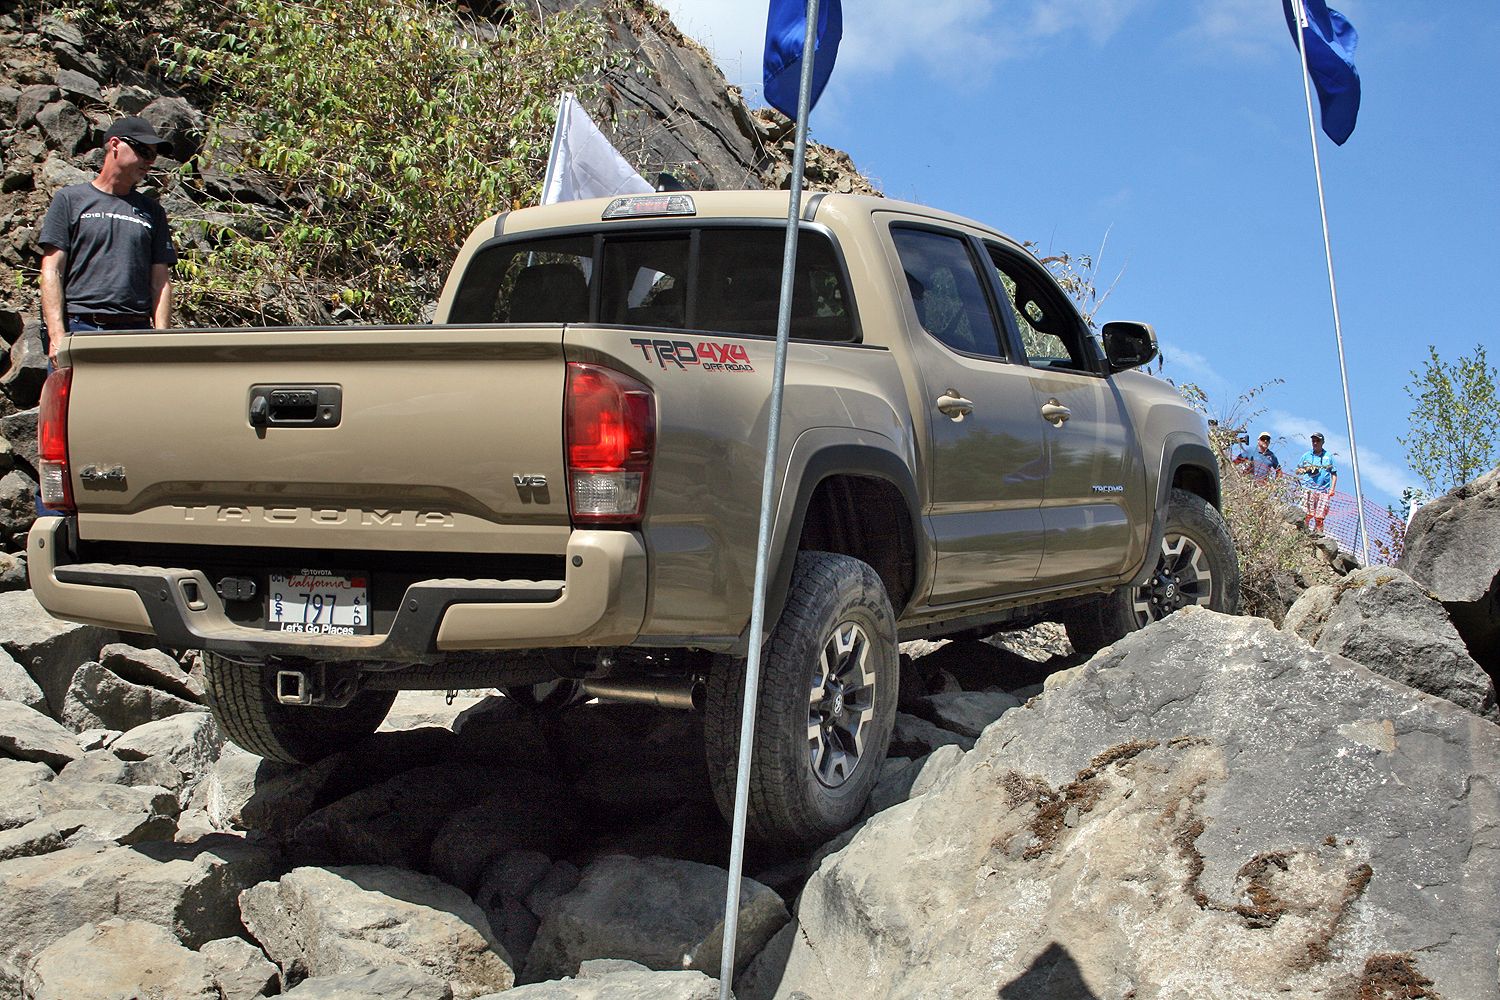 2016 Toyota Tacoma - First Drive